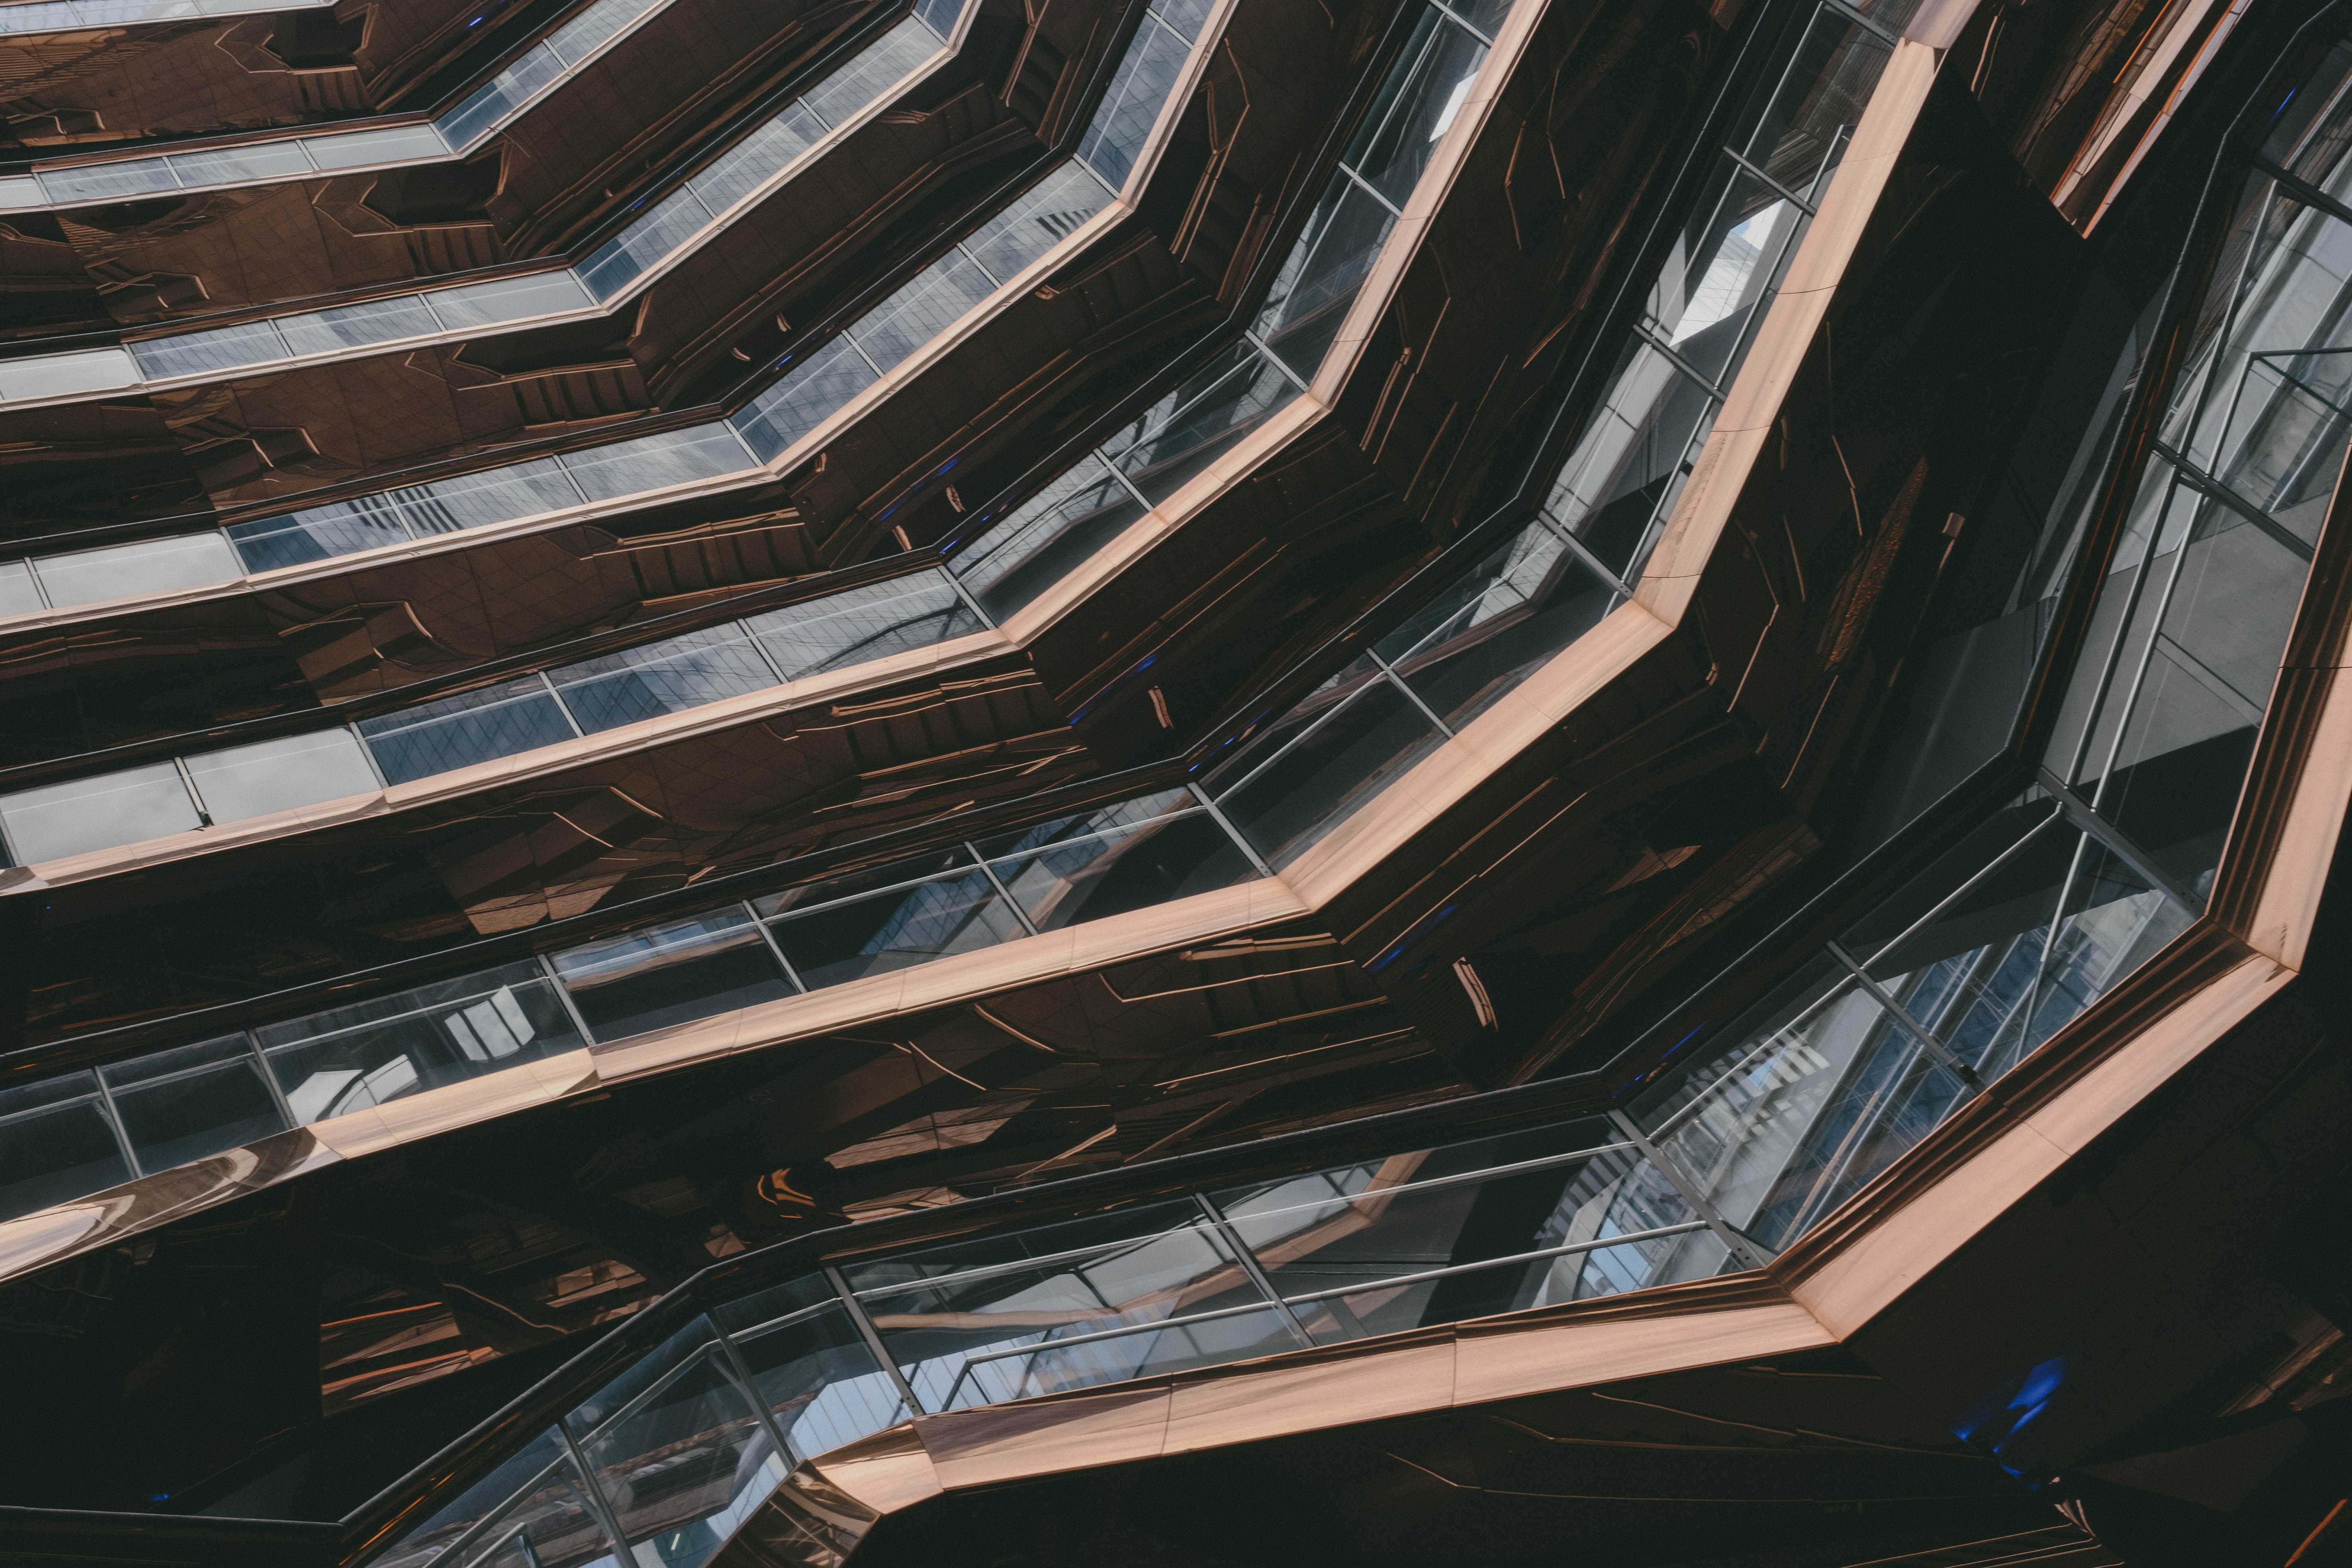 Abstract image of The Vessel in Hudson Yards